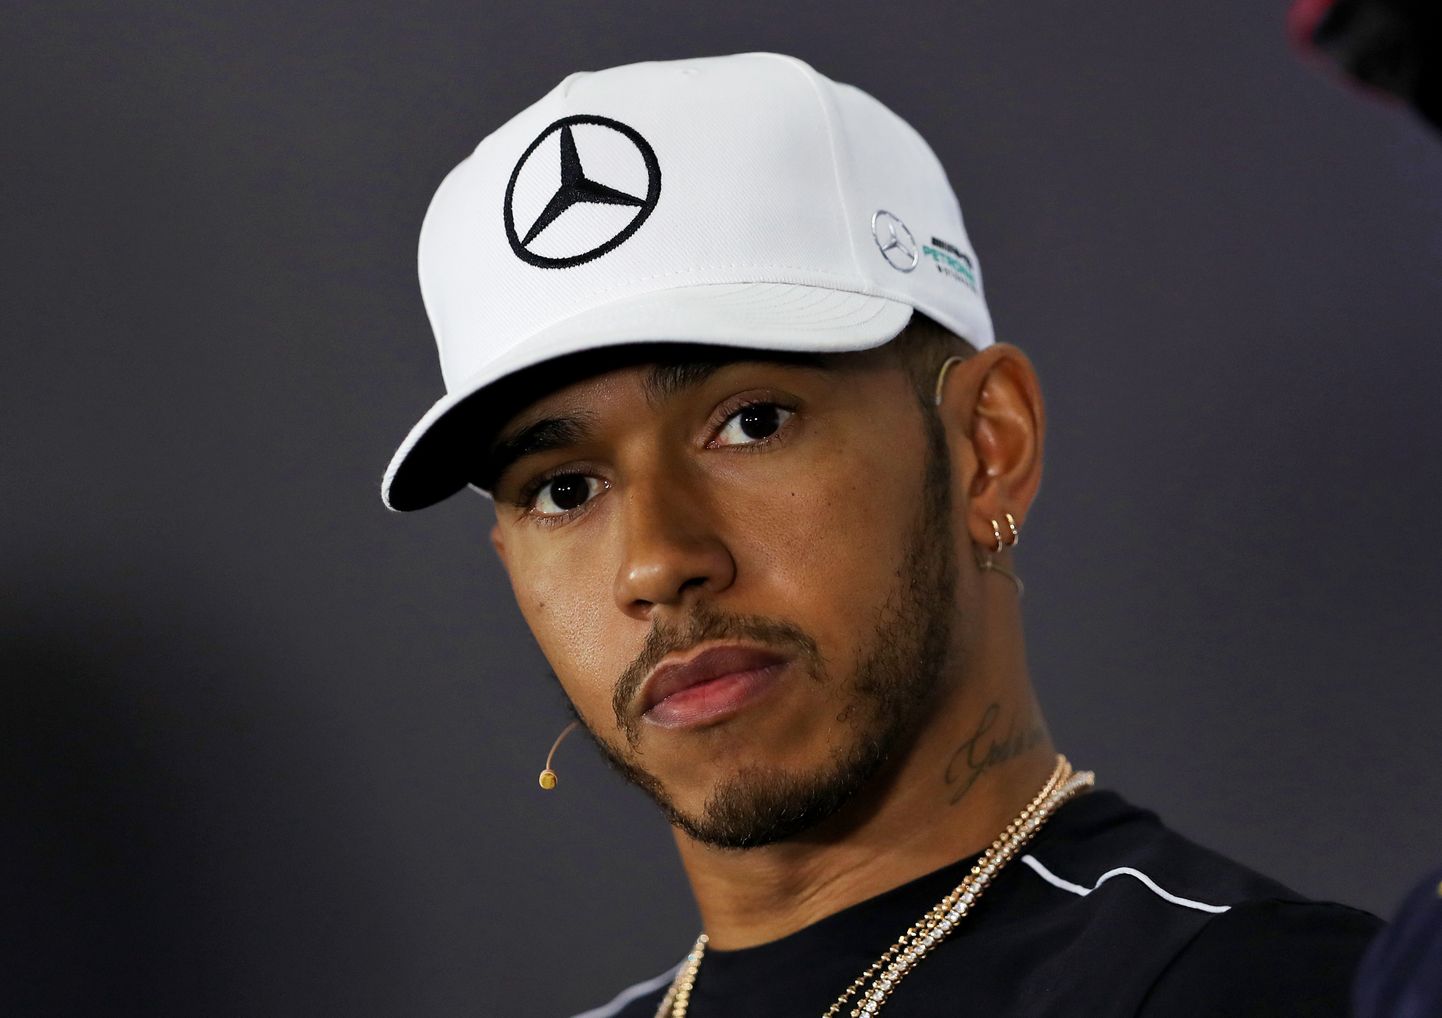 File photo dated 13-07-2017 of Mercedes' Lewis Hamilton.